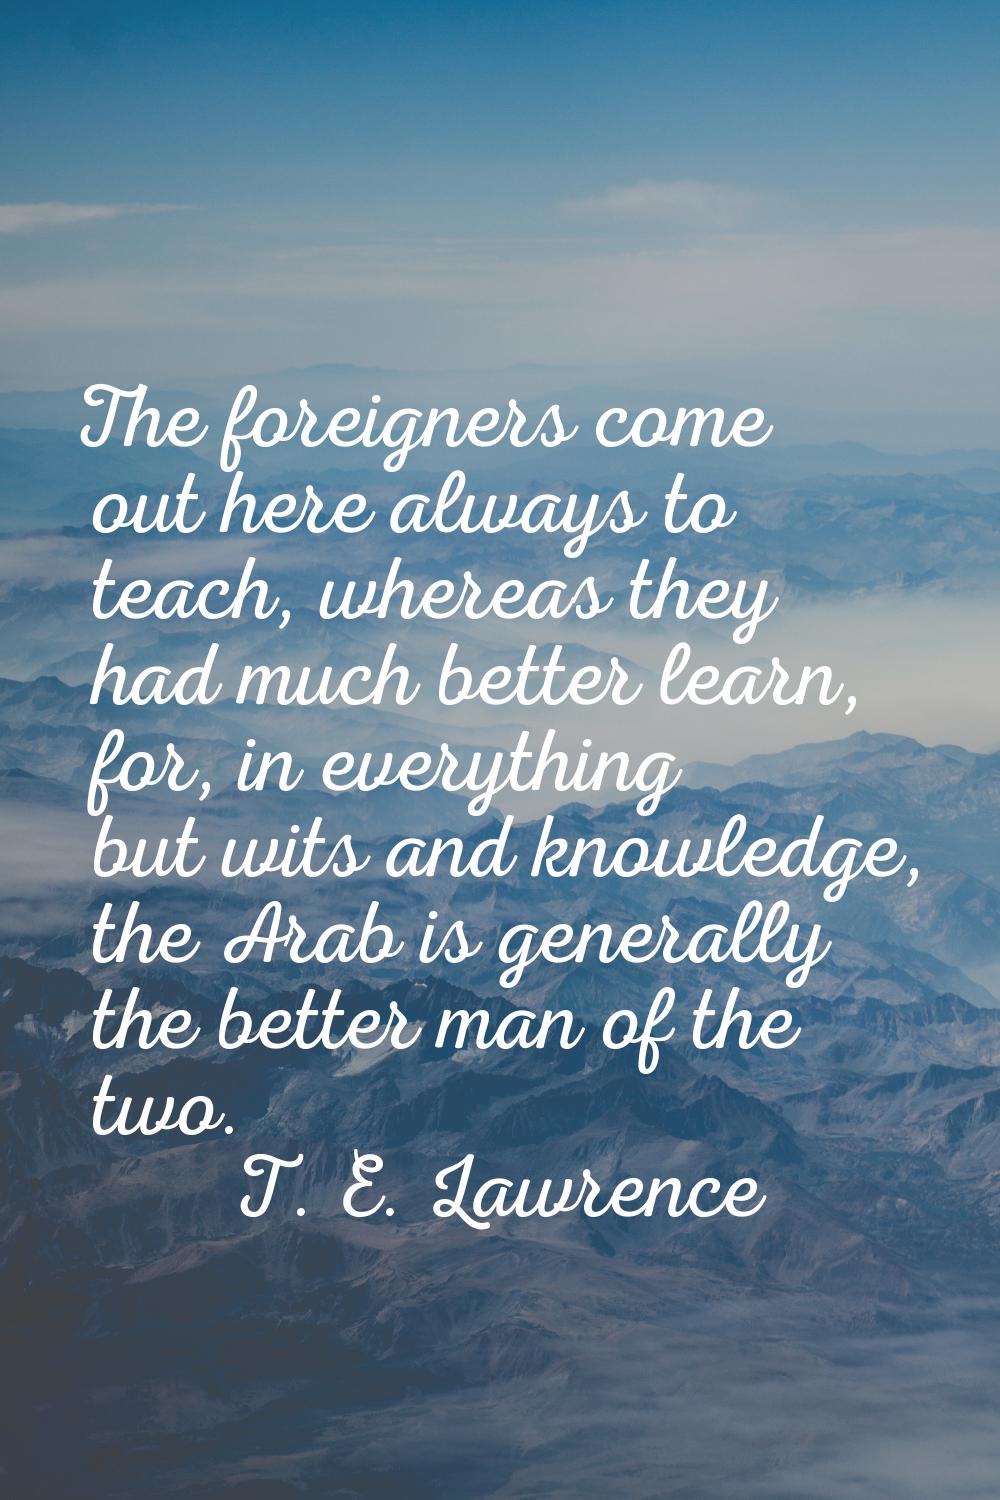 The foreigners come out here always to teach, whereas they had much better learn, for, in everythin